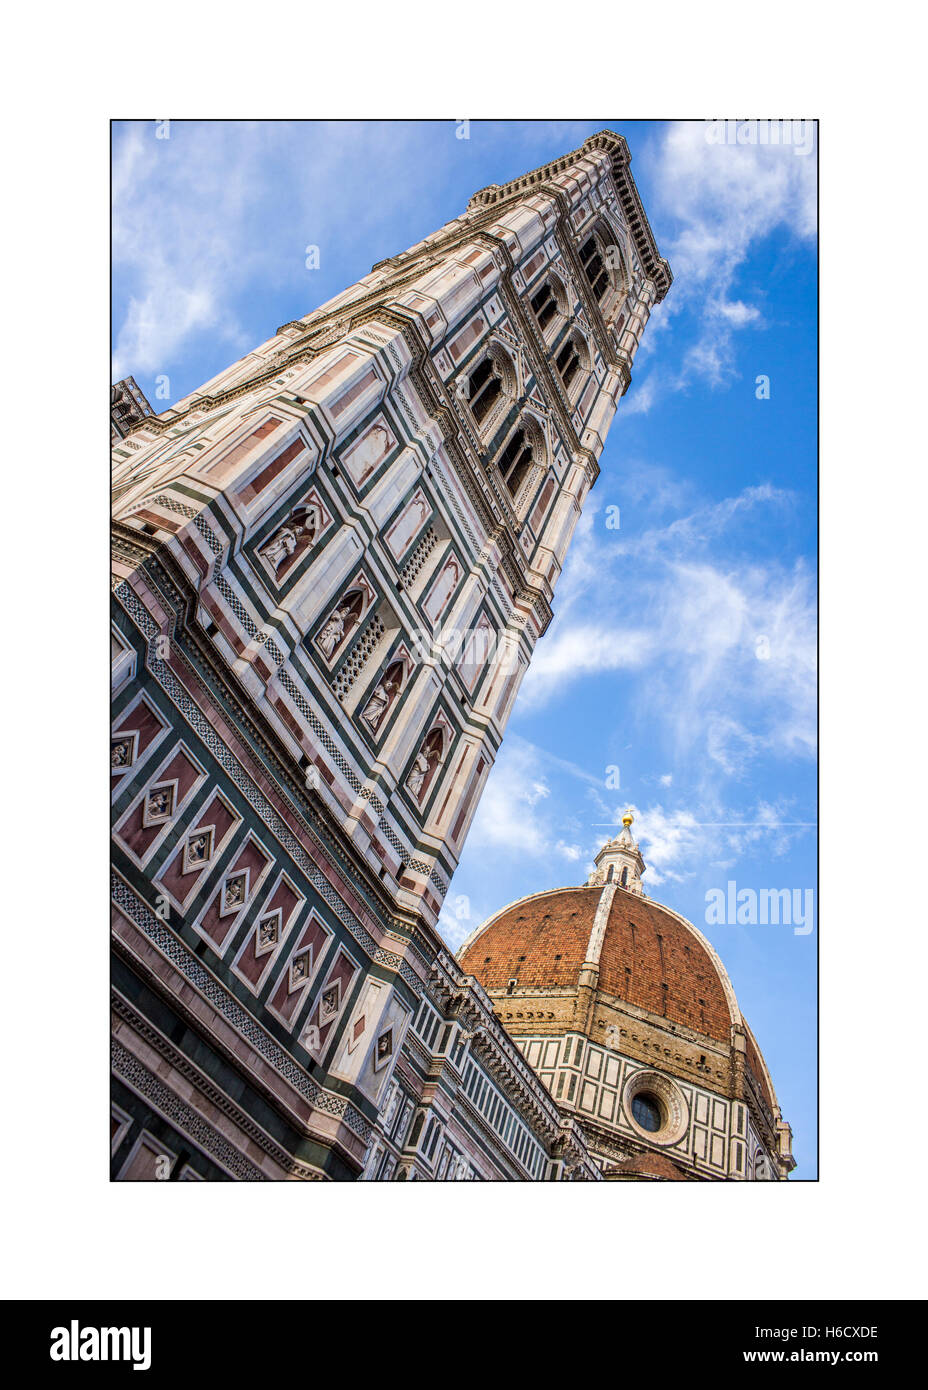 Cupola of Brunelleschi and Giotto's tower Bell in Florence, Italy. From bottom angle. Summer day with some cloud Stock Photo